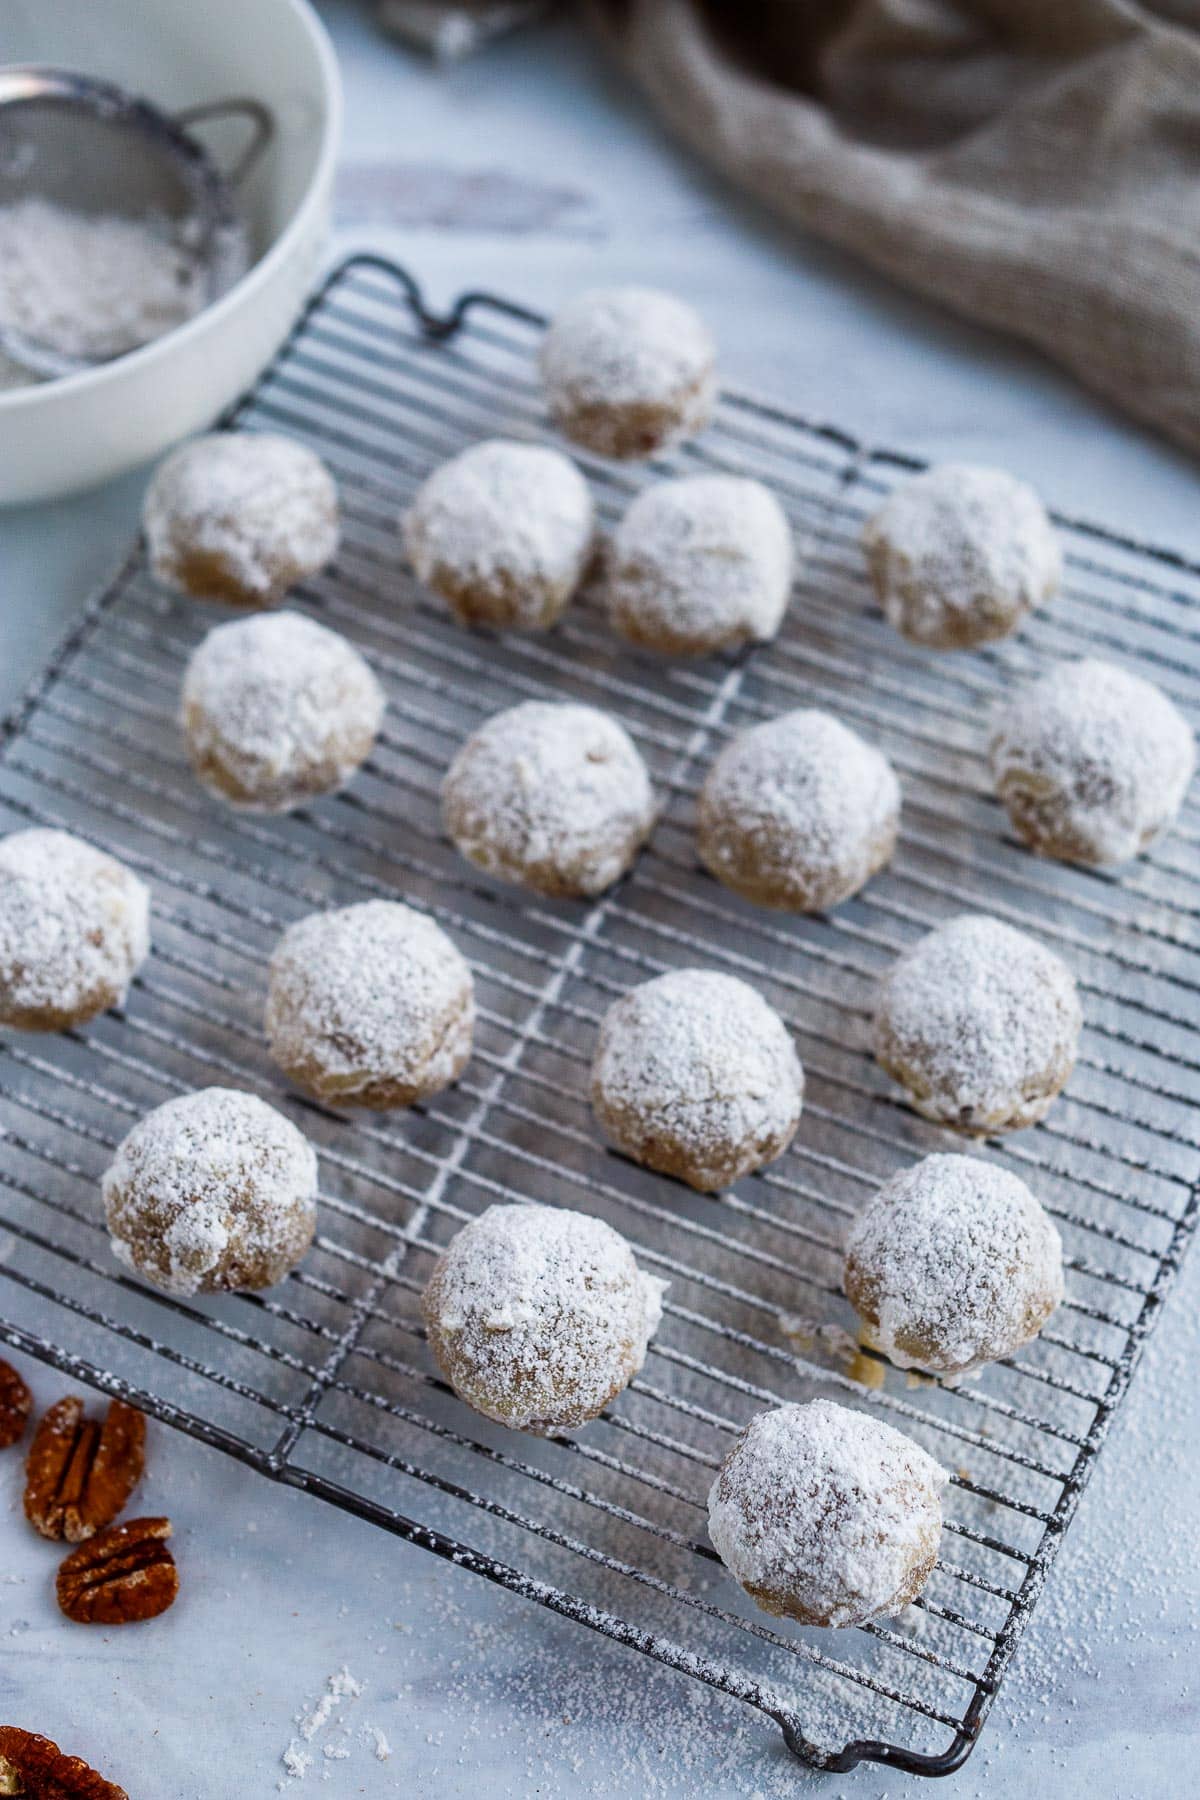 Irresistible Snowball Cookies enhanced with earthy rye flour and toasted pecans are melt in your mouth delicious! Easy to make, they stay fresh for days and make the perfect gift. Known also as Mexican Wedding Cookies and Russian Tea Cakes.